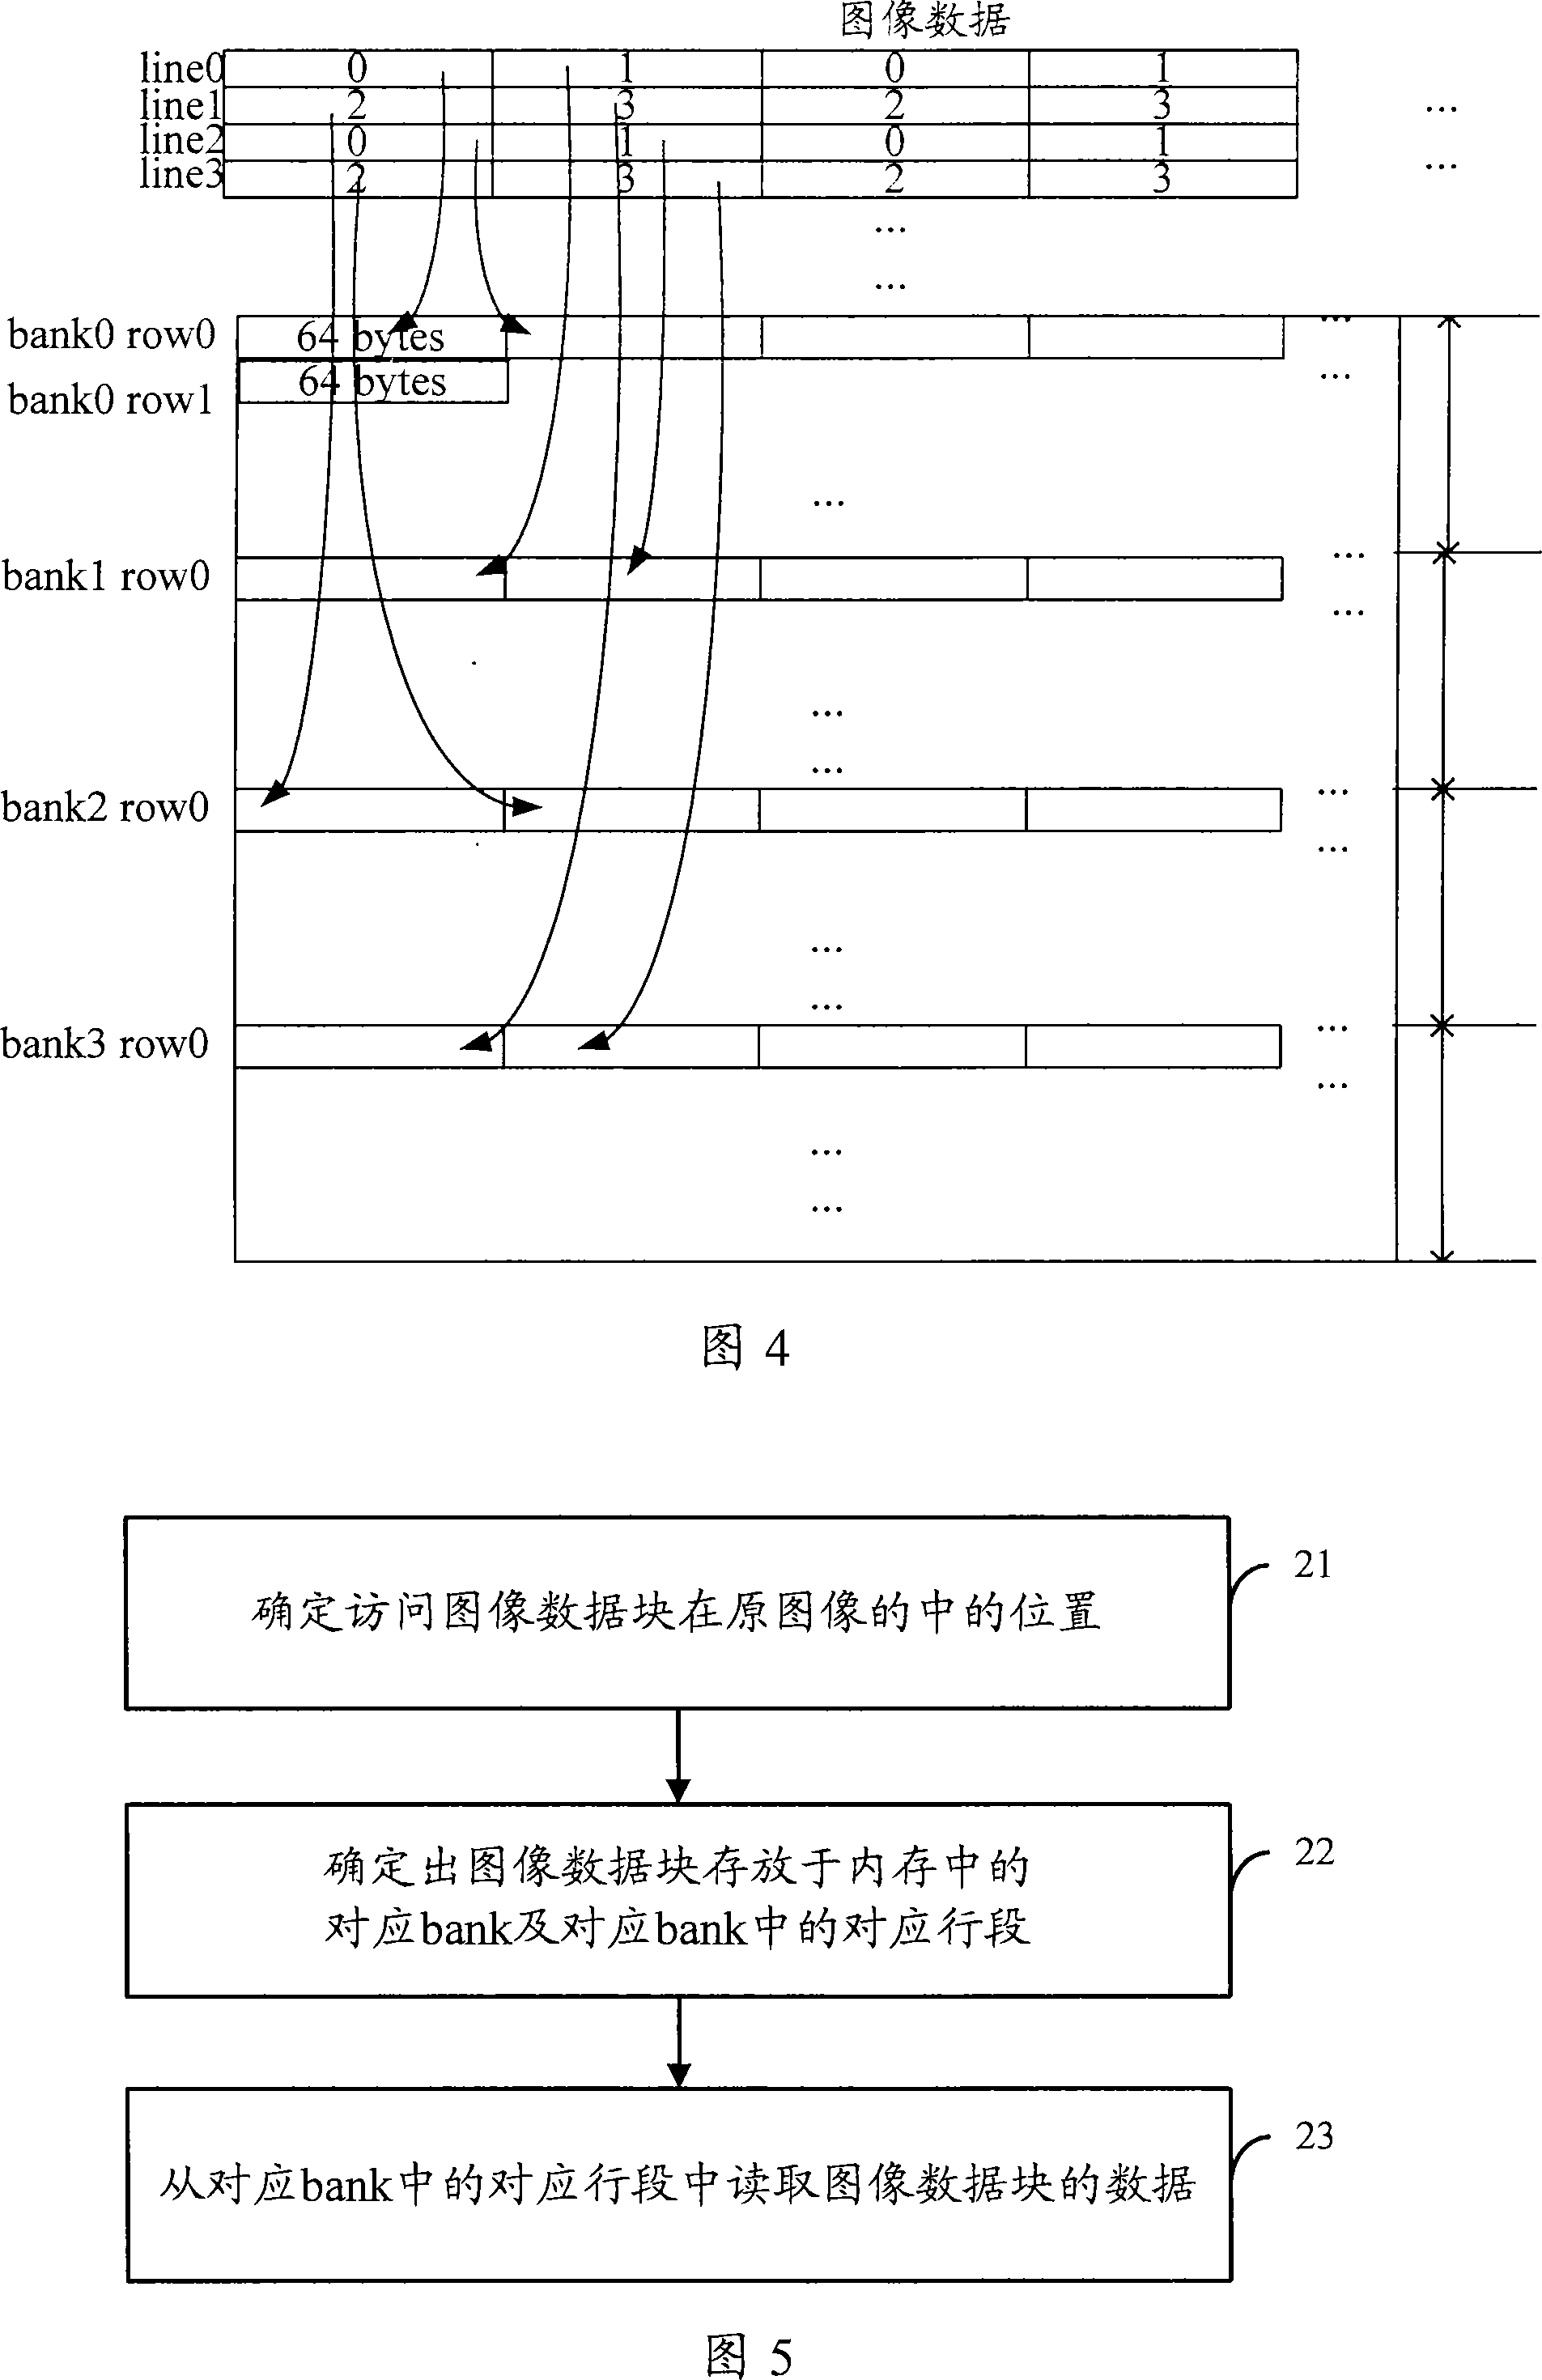 An image data memory projection method, assess method and device